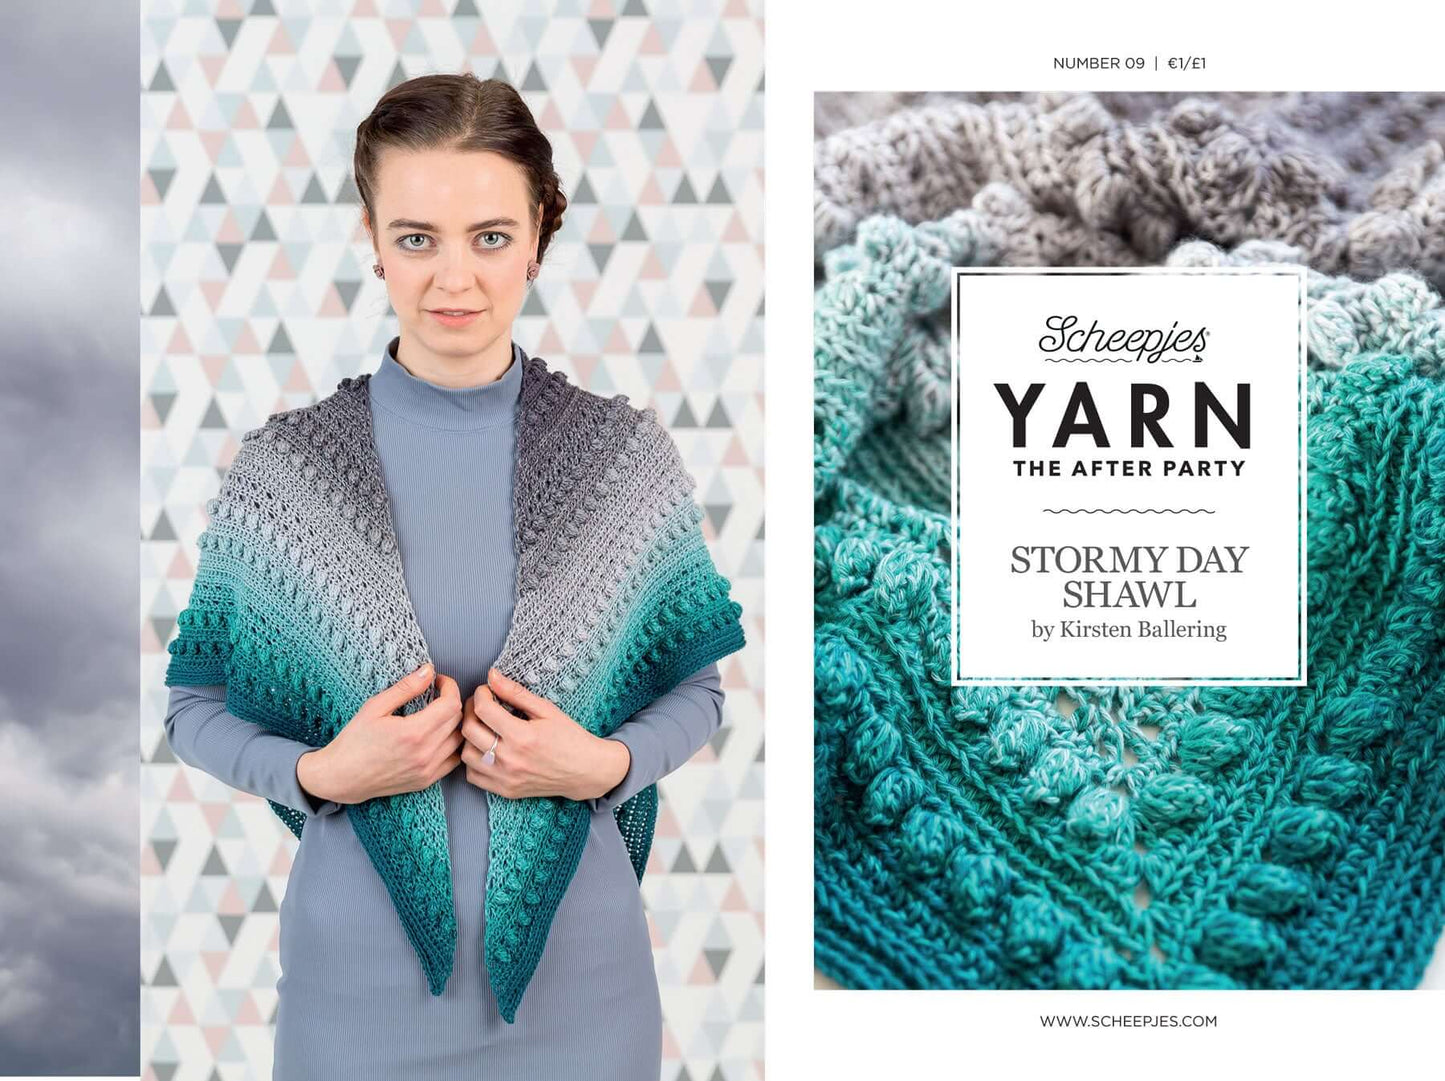 Scheepjes Yarn The After Party no. 09 - Stormy Day Shawl (booklet) - (Crochet)